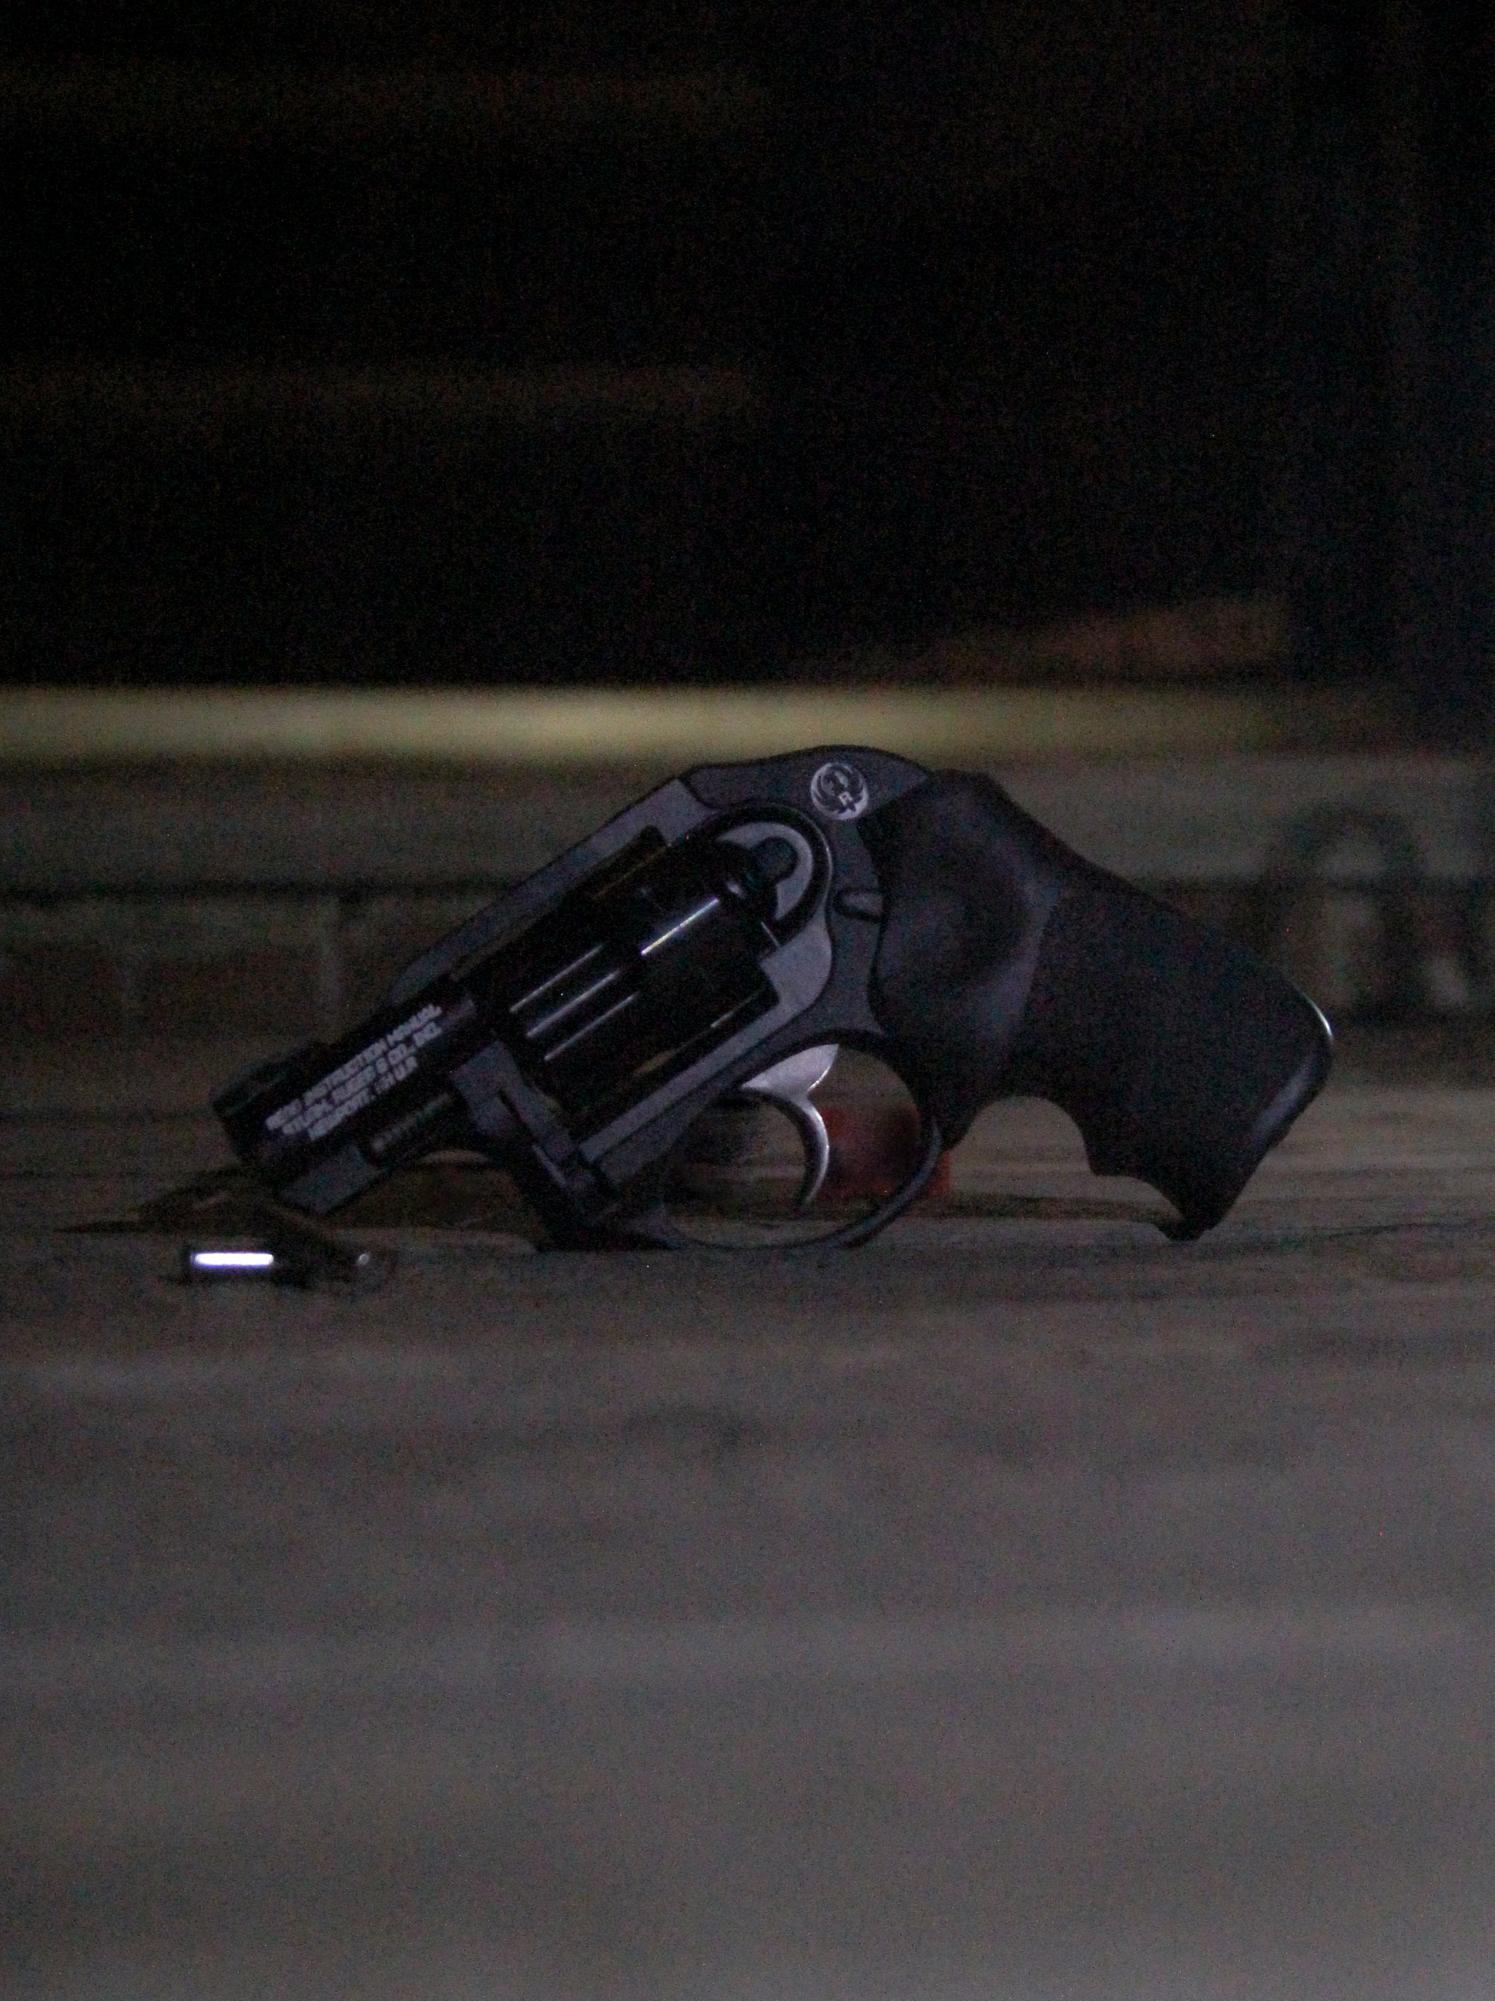 A gun rests on a planked floor.